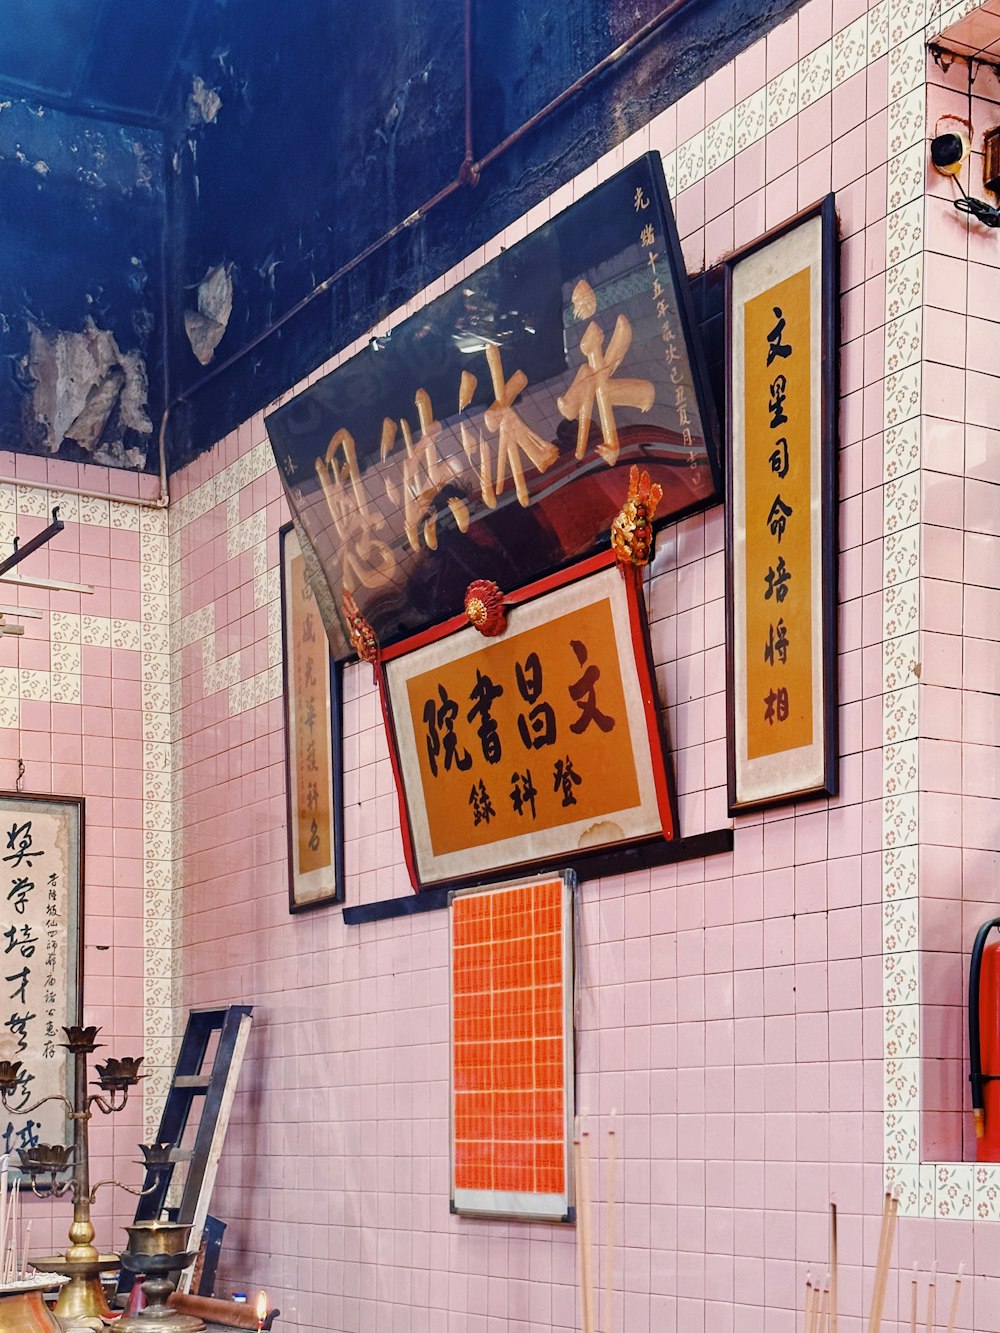 a pink tiled wall with asian writing on it